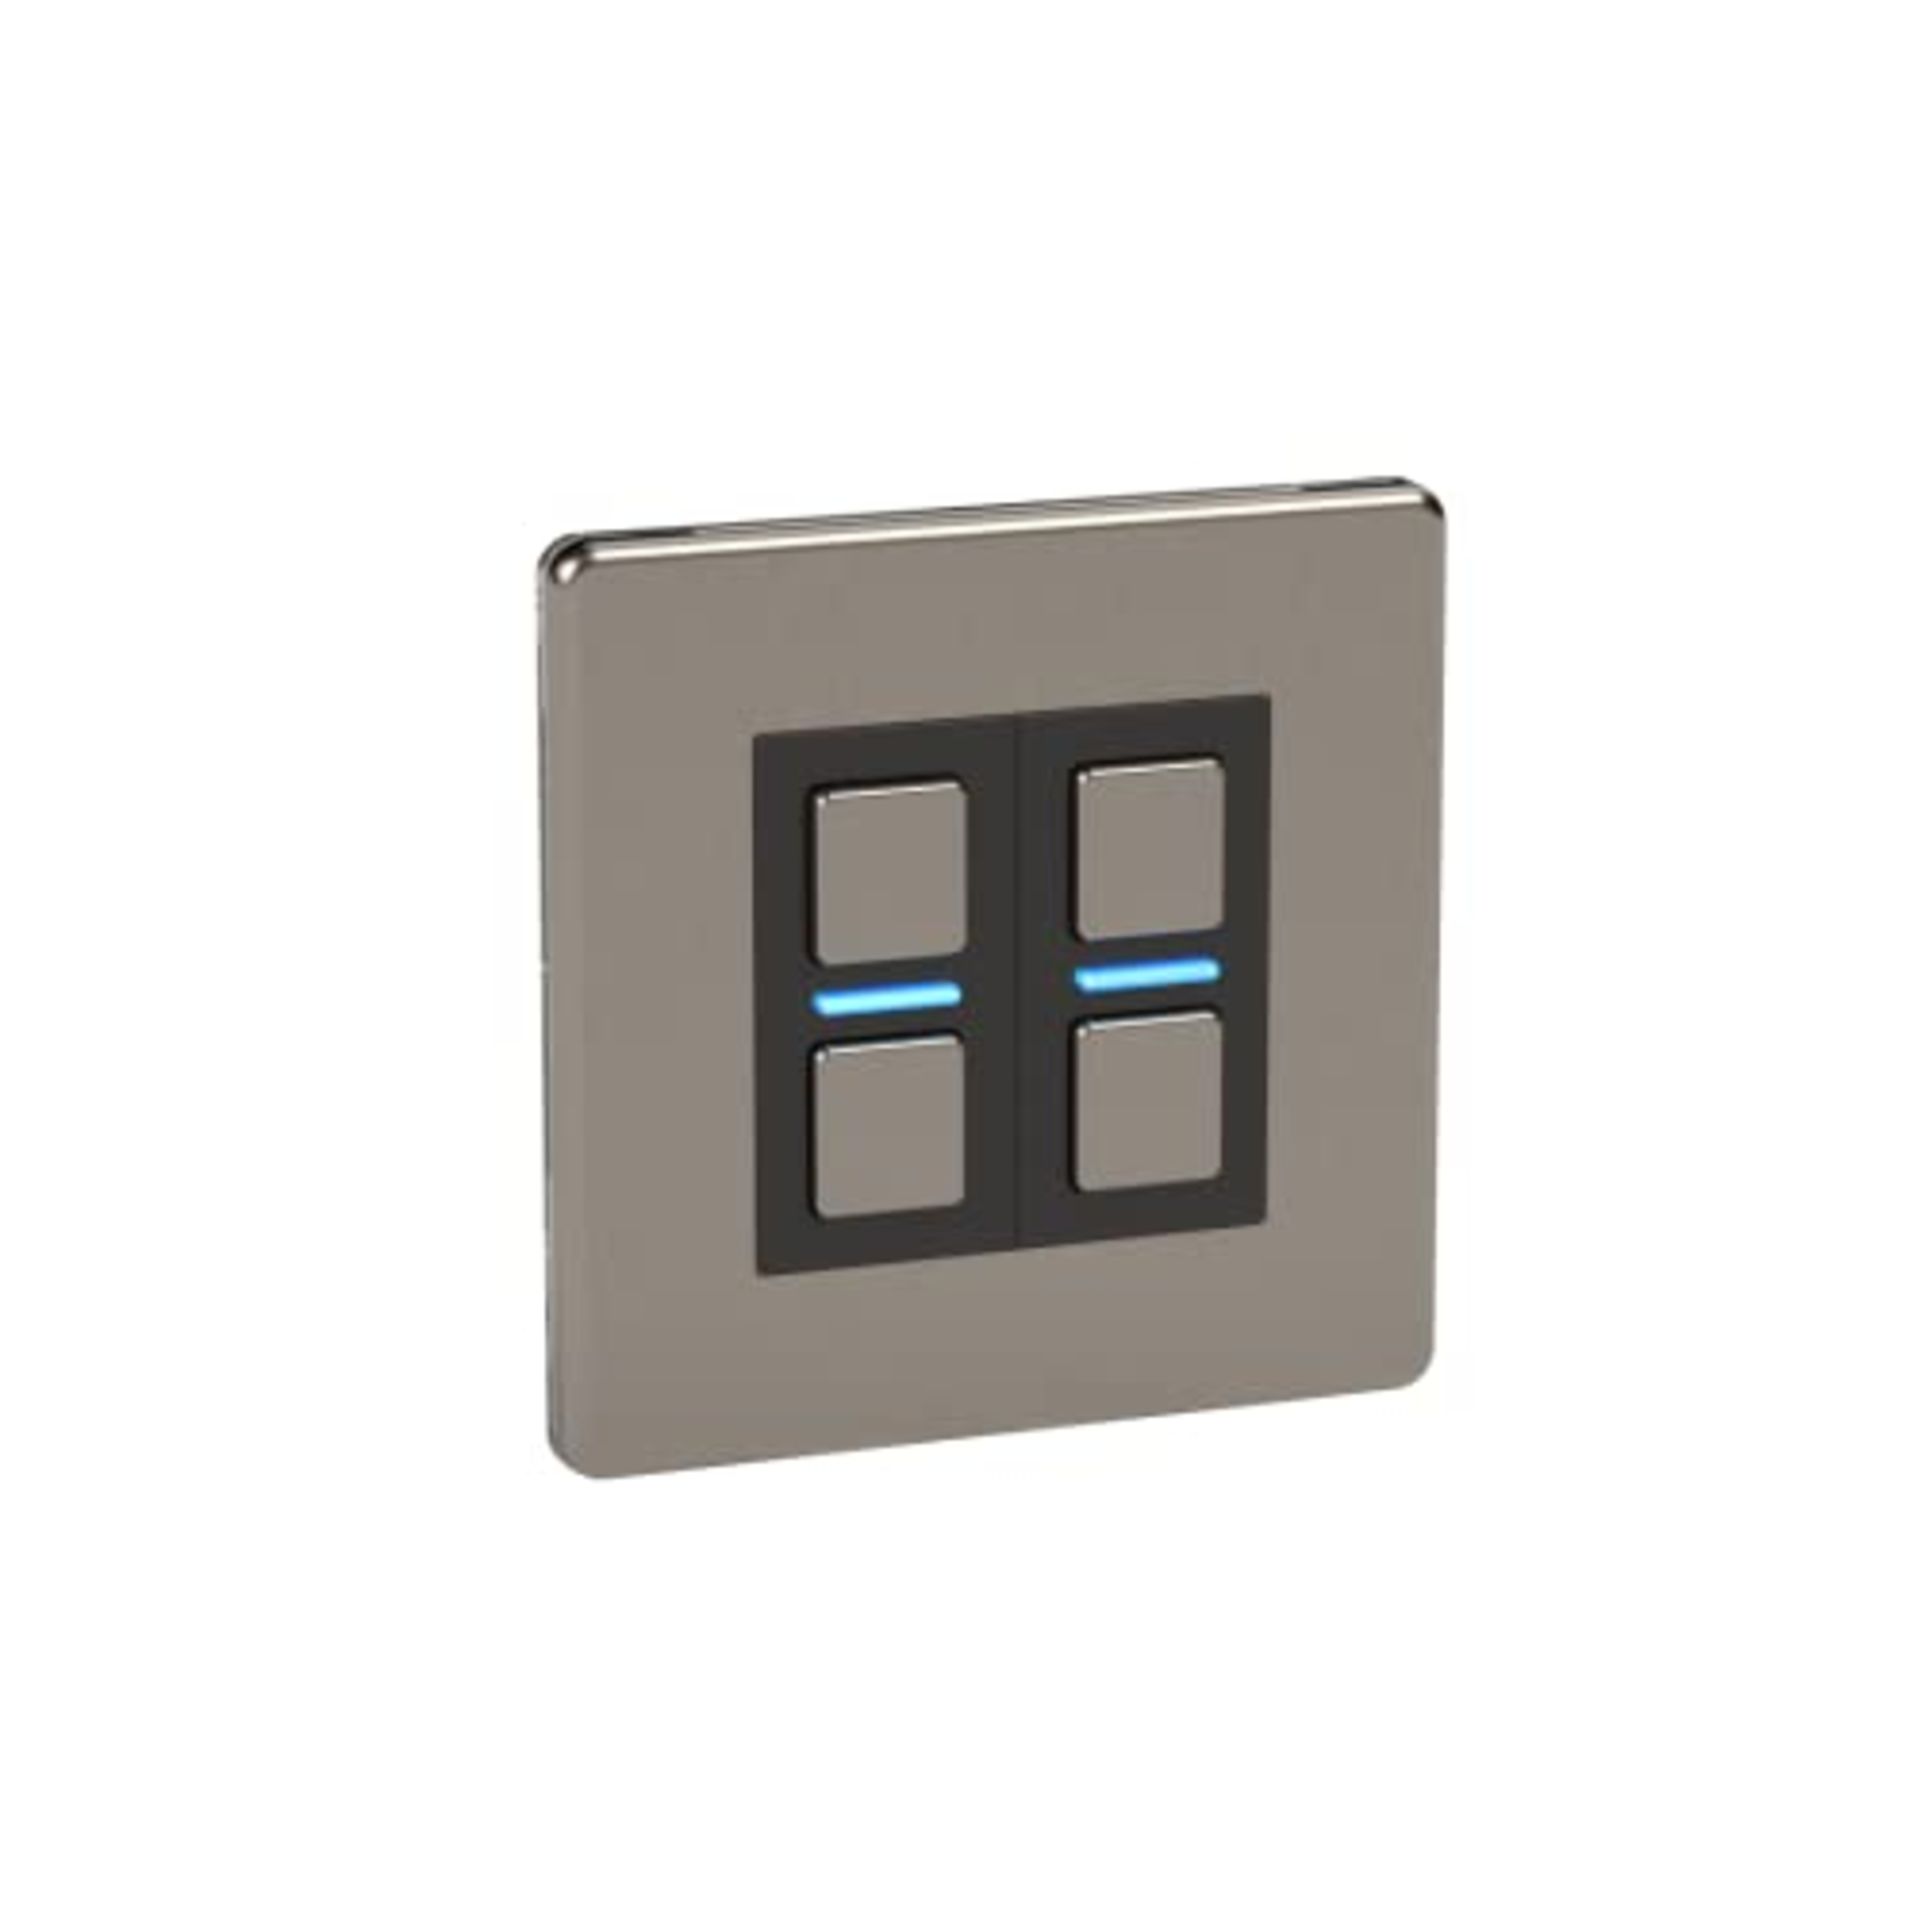 RRP £119.00 Lightwave LP22MK2 Smart Dimmer with Energy Monitoring, 2 Gang, Stainless Steel - Works - Image 7 of 10